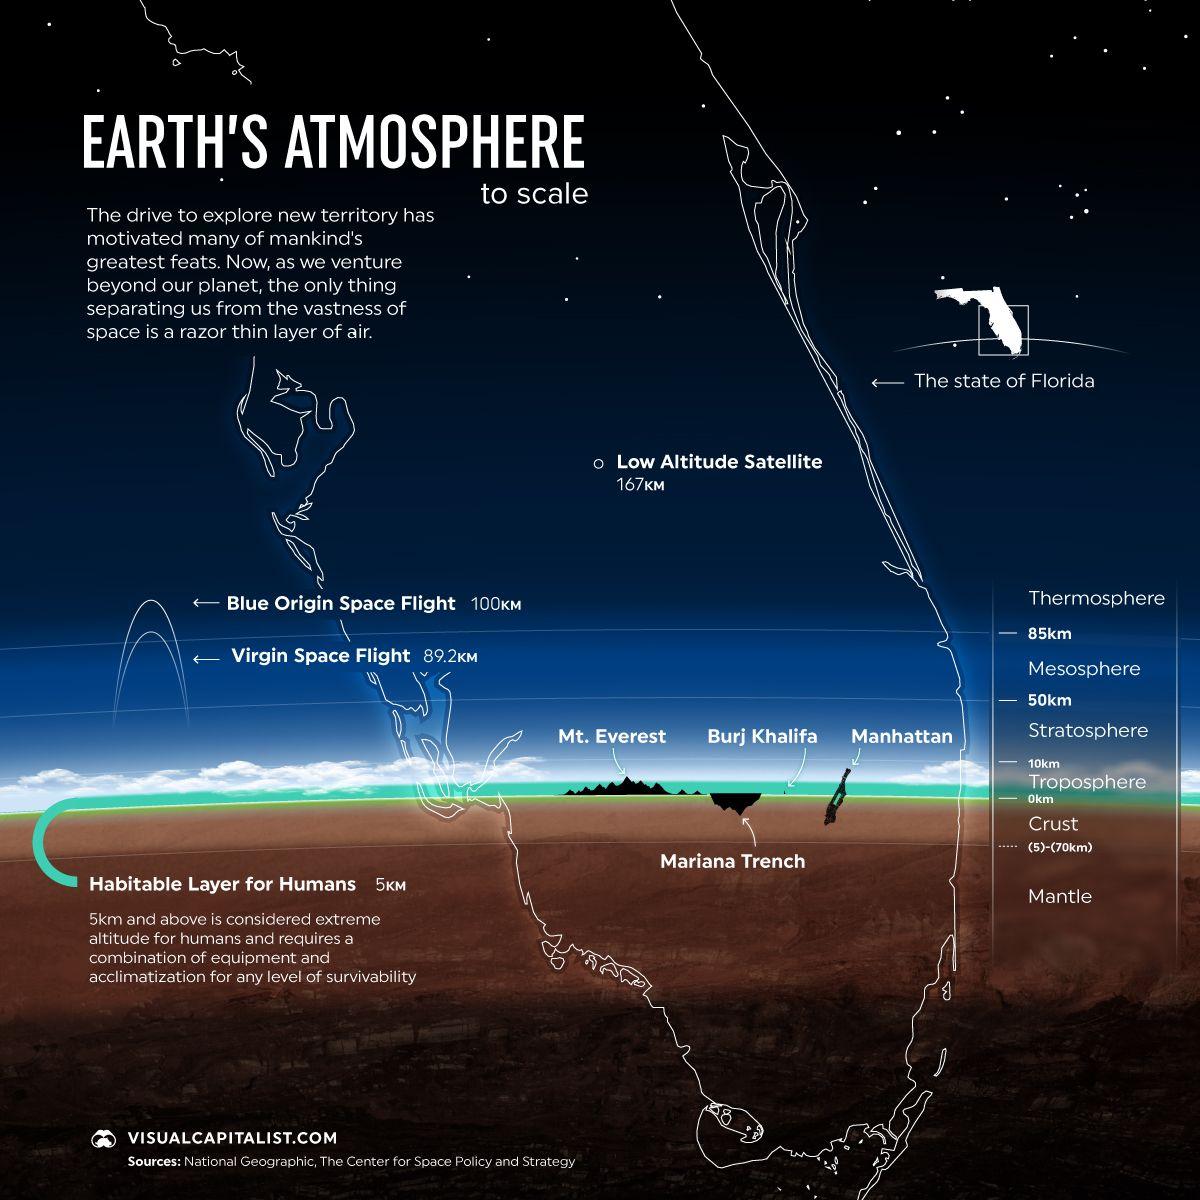 Razor Thin: A New Perspective on Earth’s Atmosphere